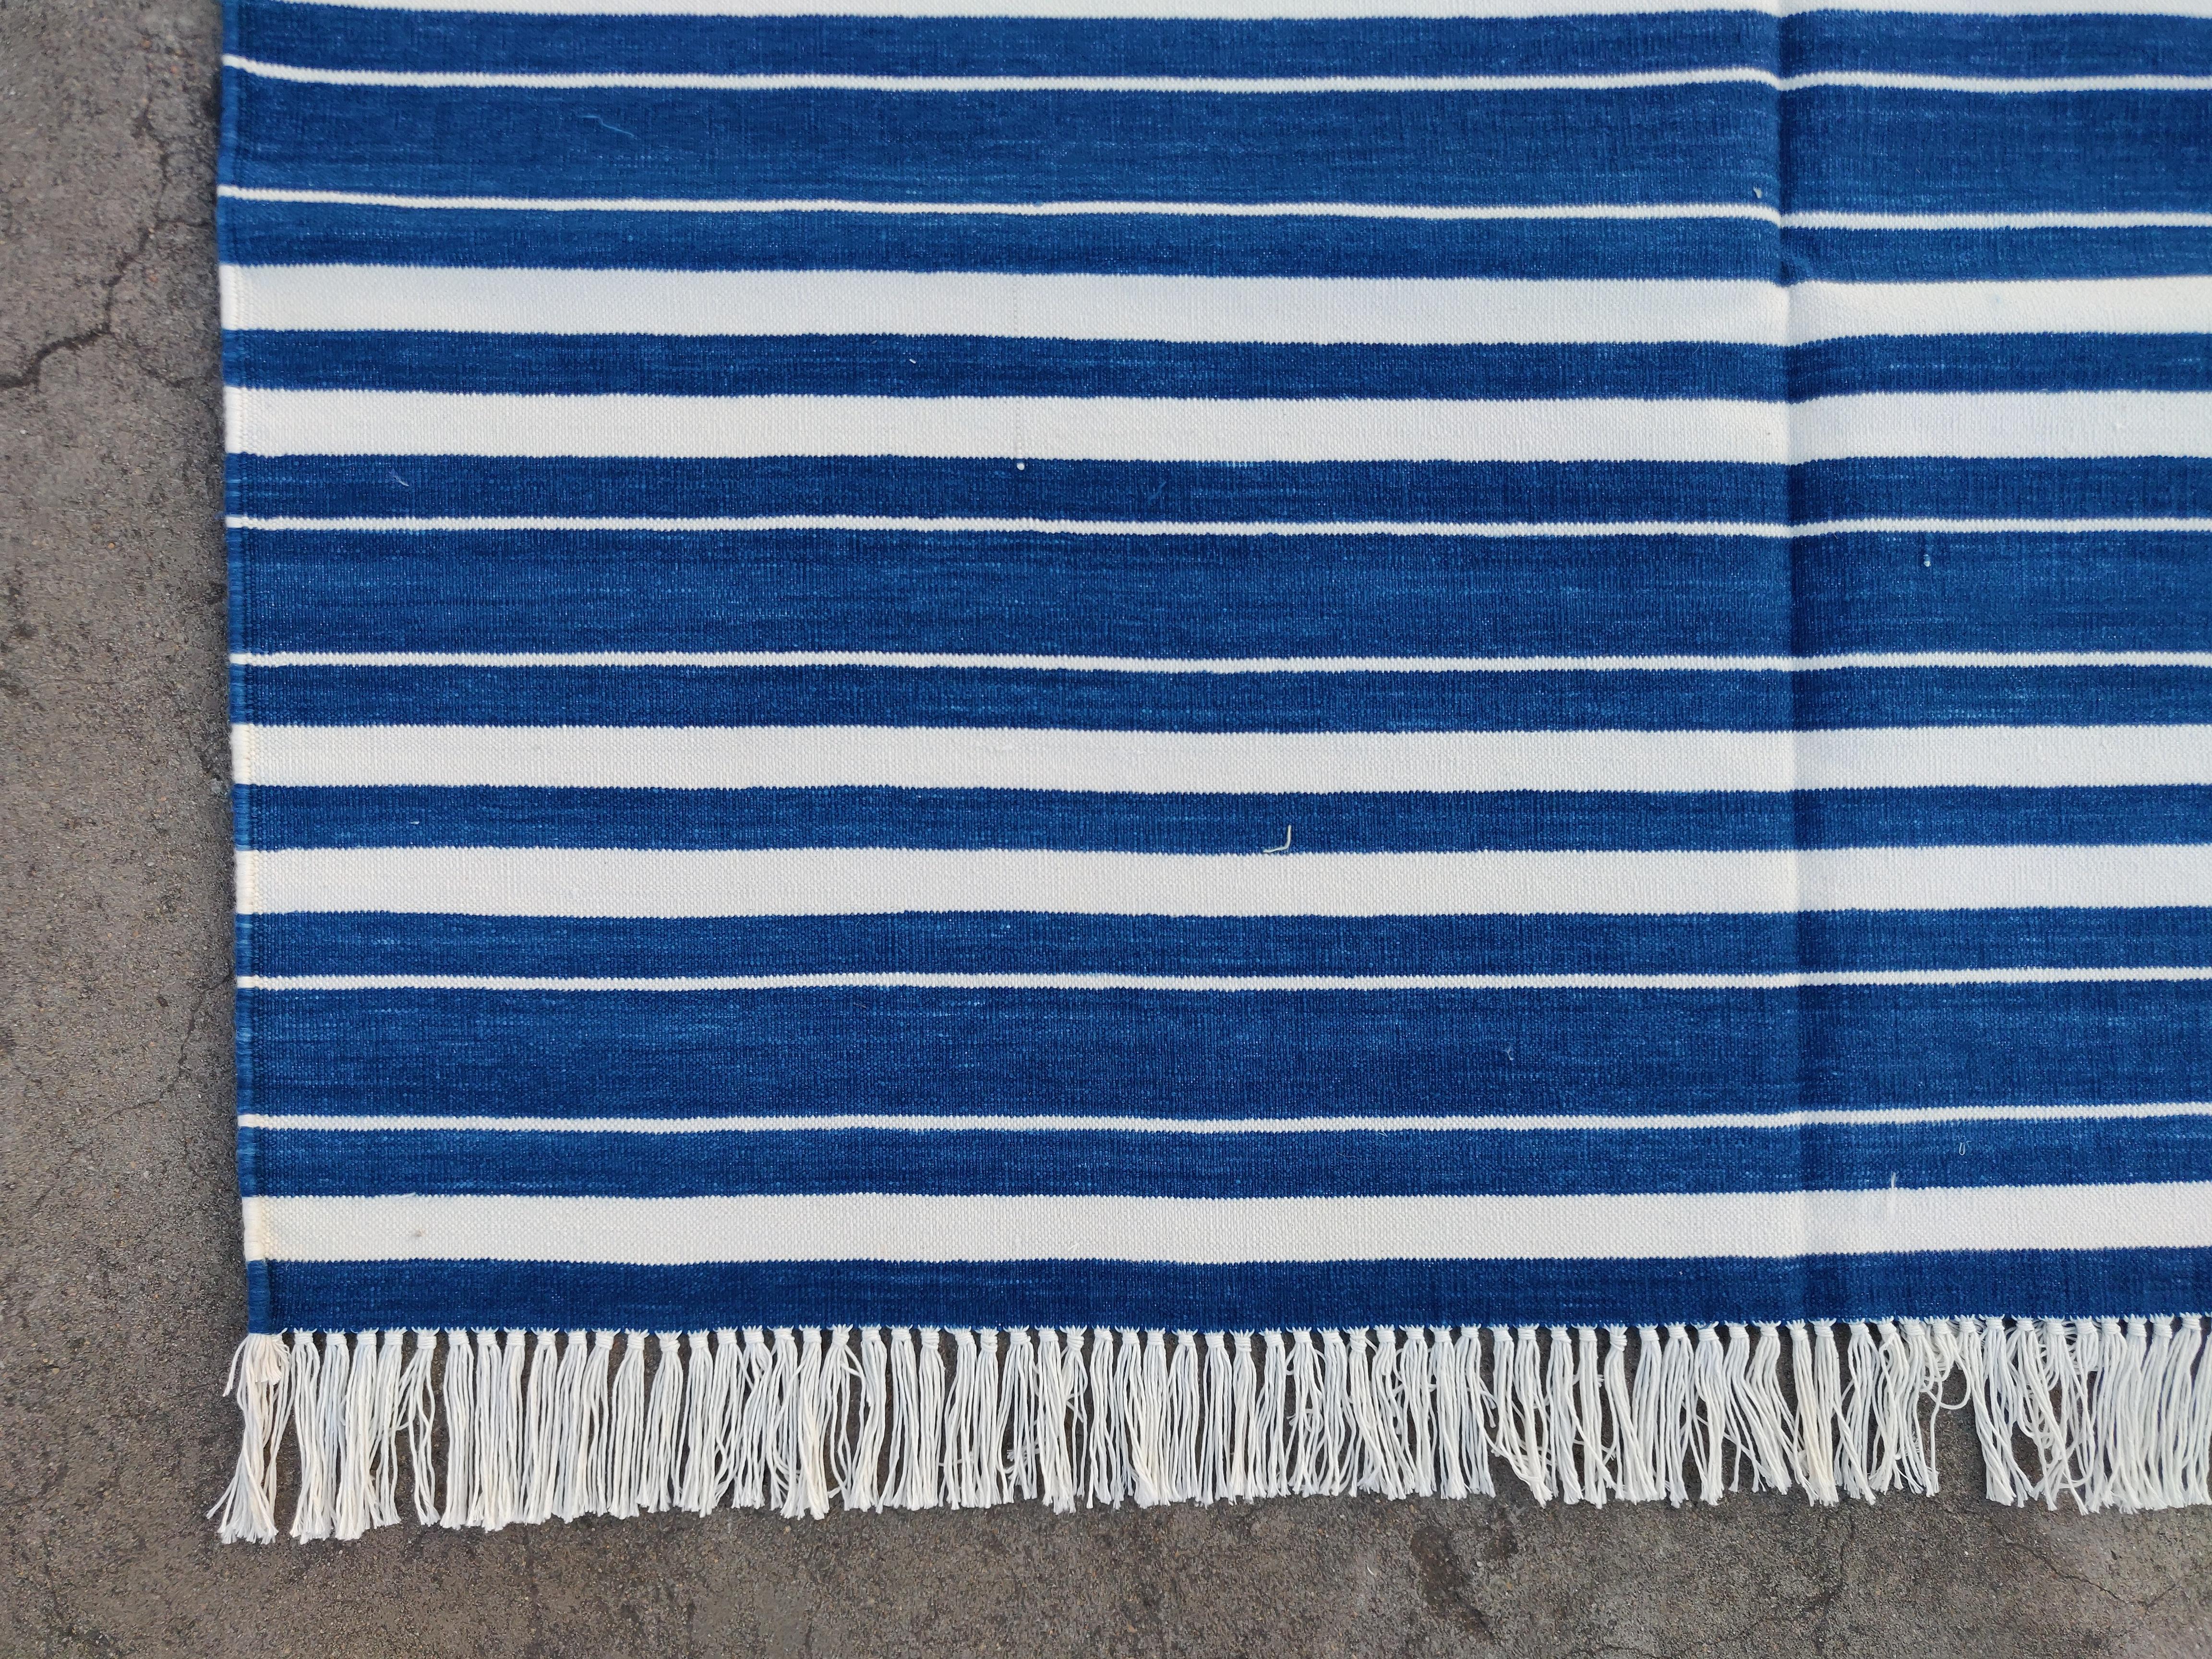 Contemporary Handmade Cotton Area Flat Weave Rug, 4x6 Blue And White Striped Indian Dhurrie For Sale